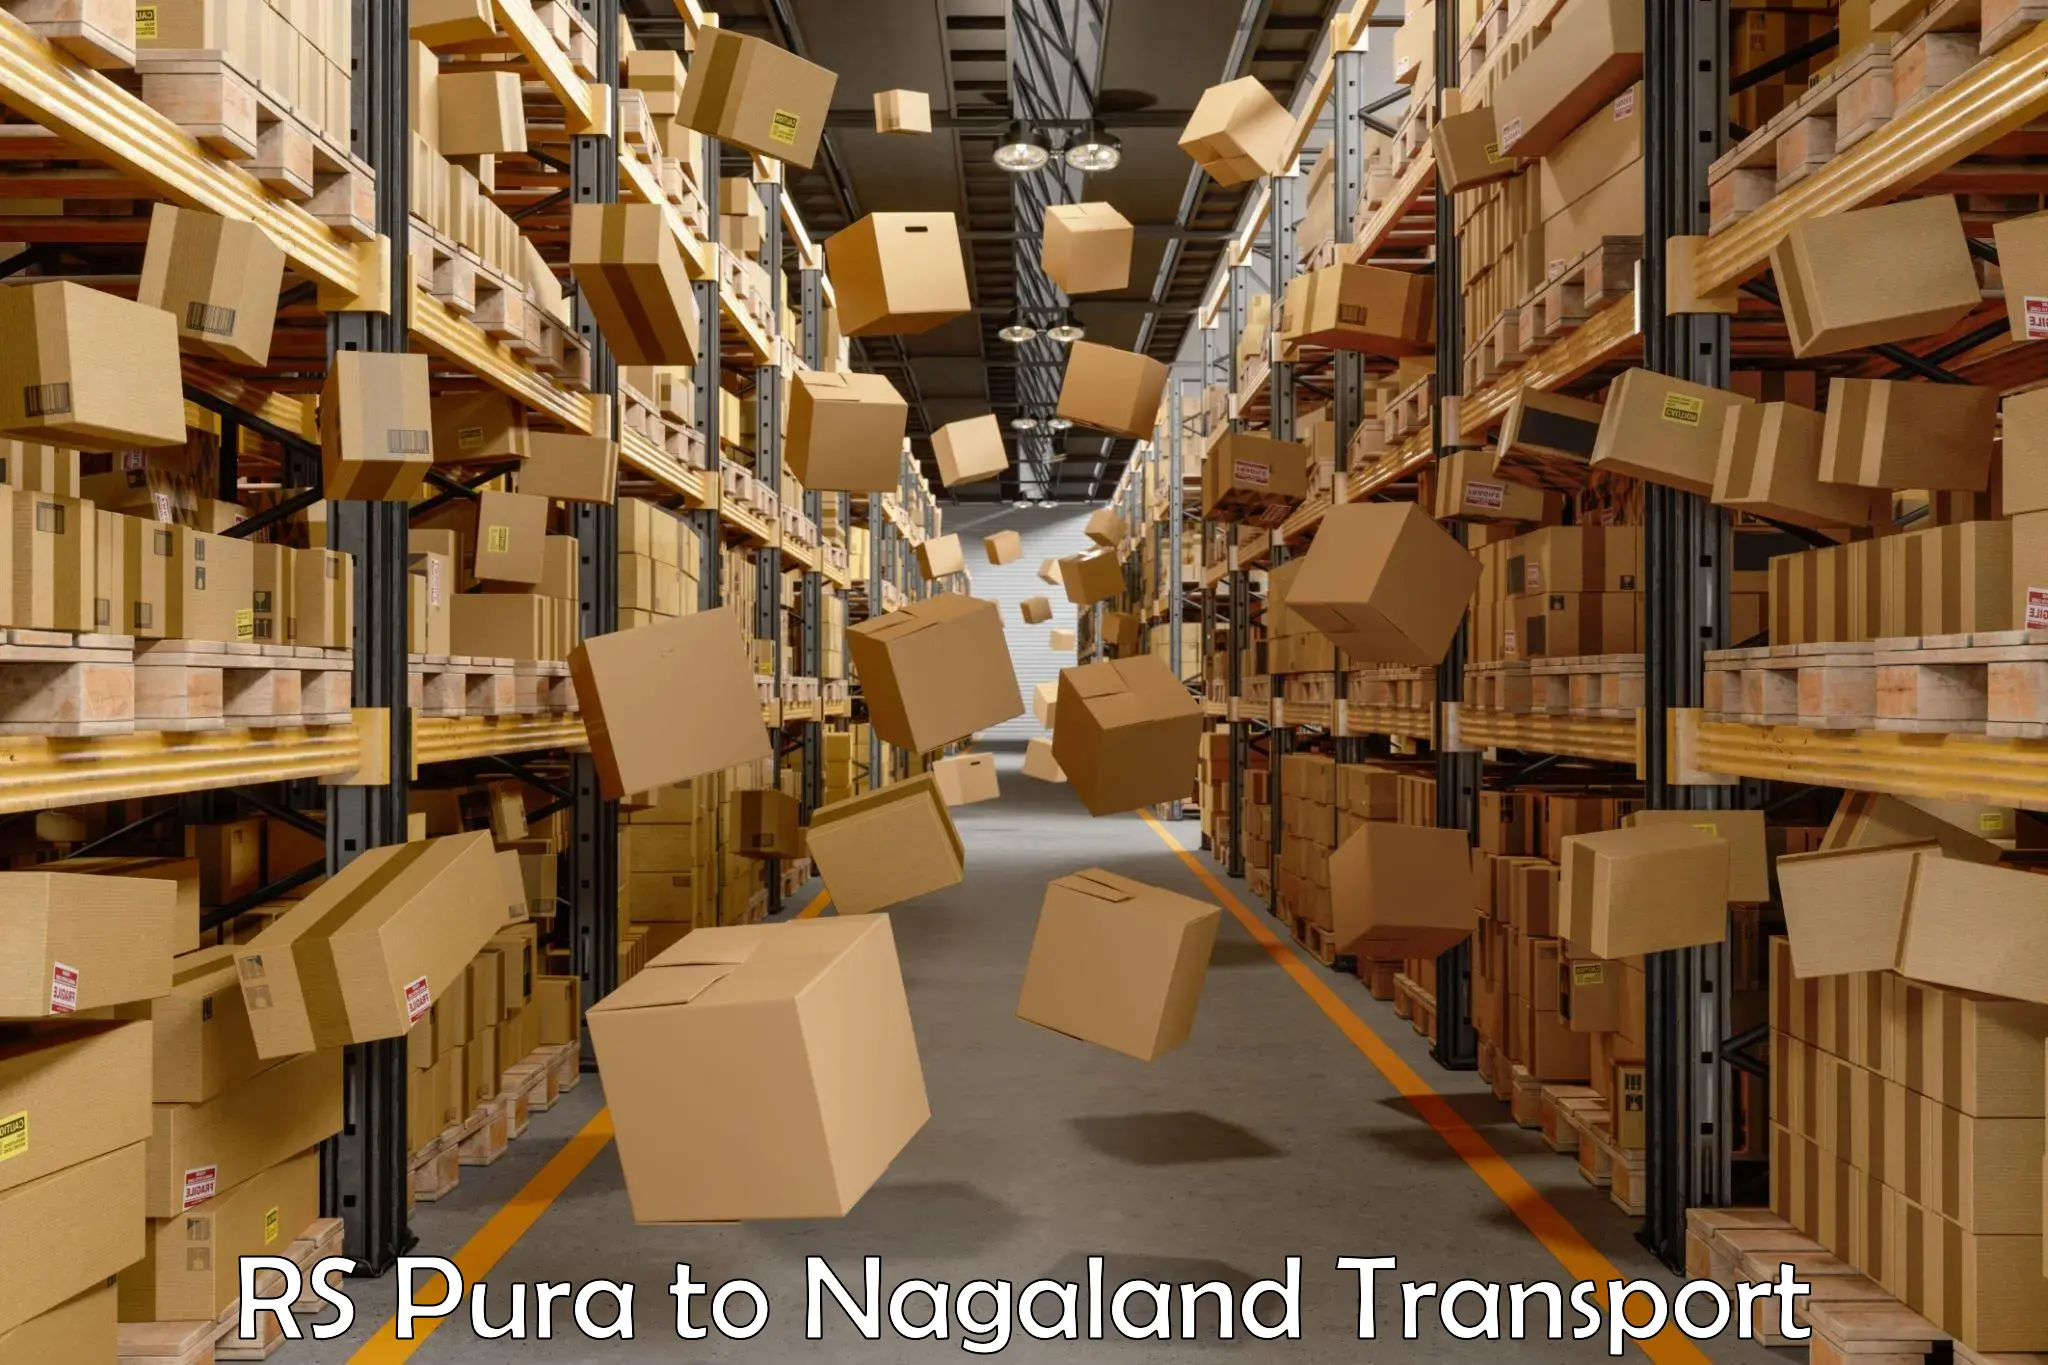 Air freight transport services RS Pura to Nagaland